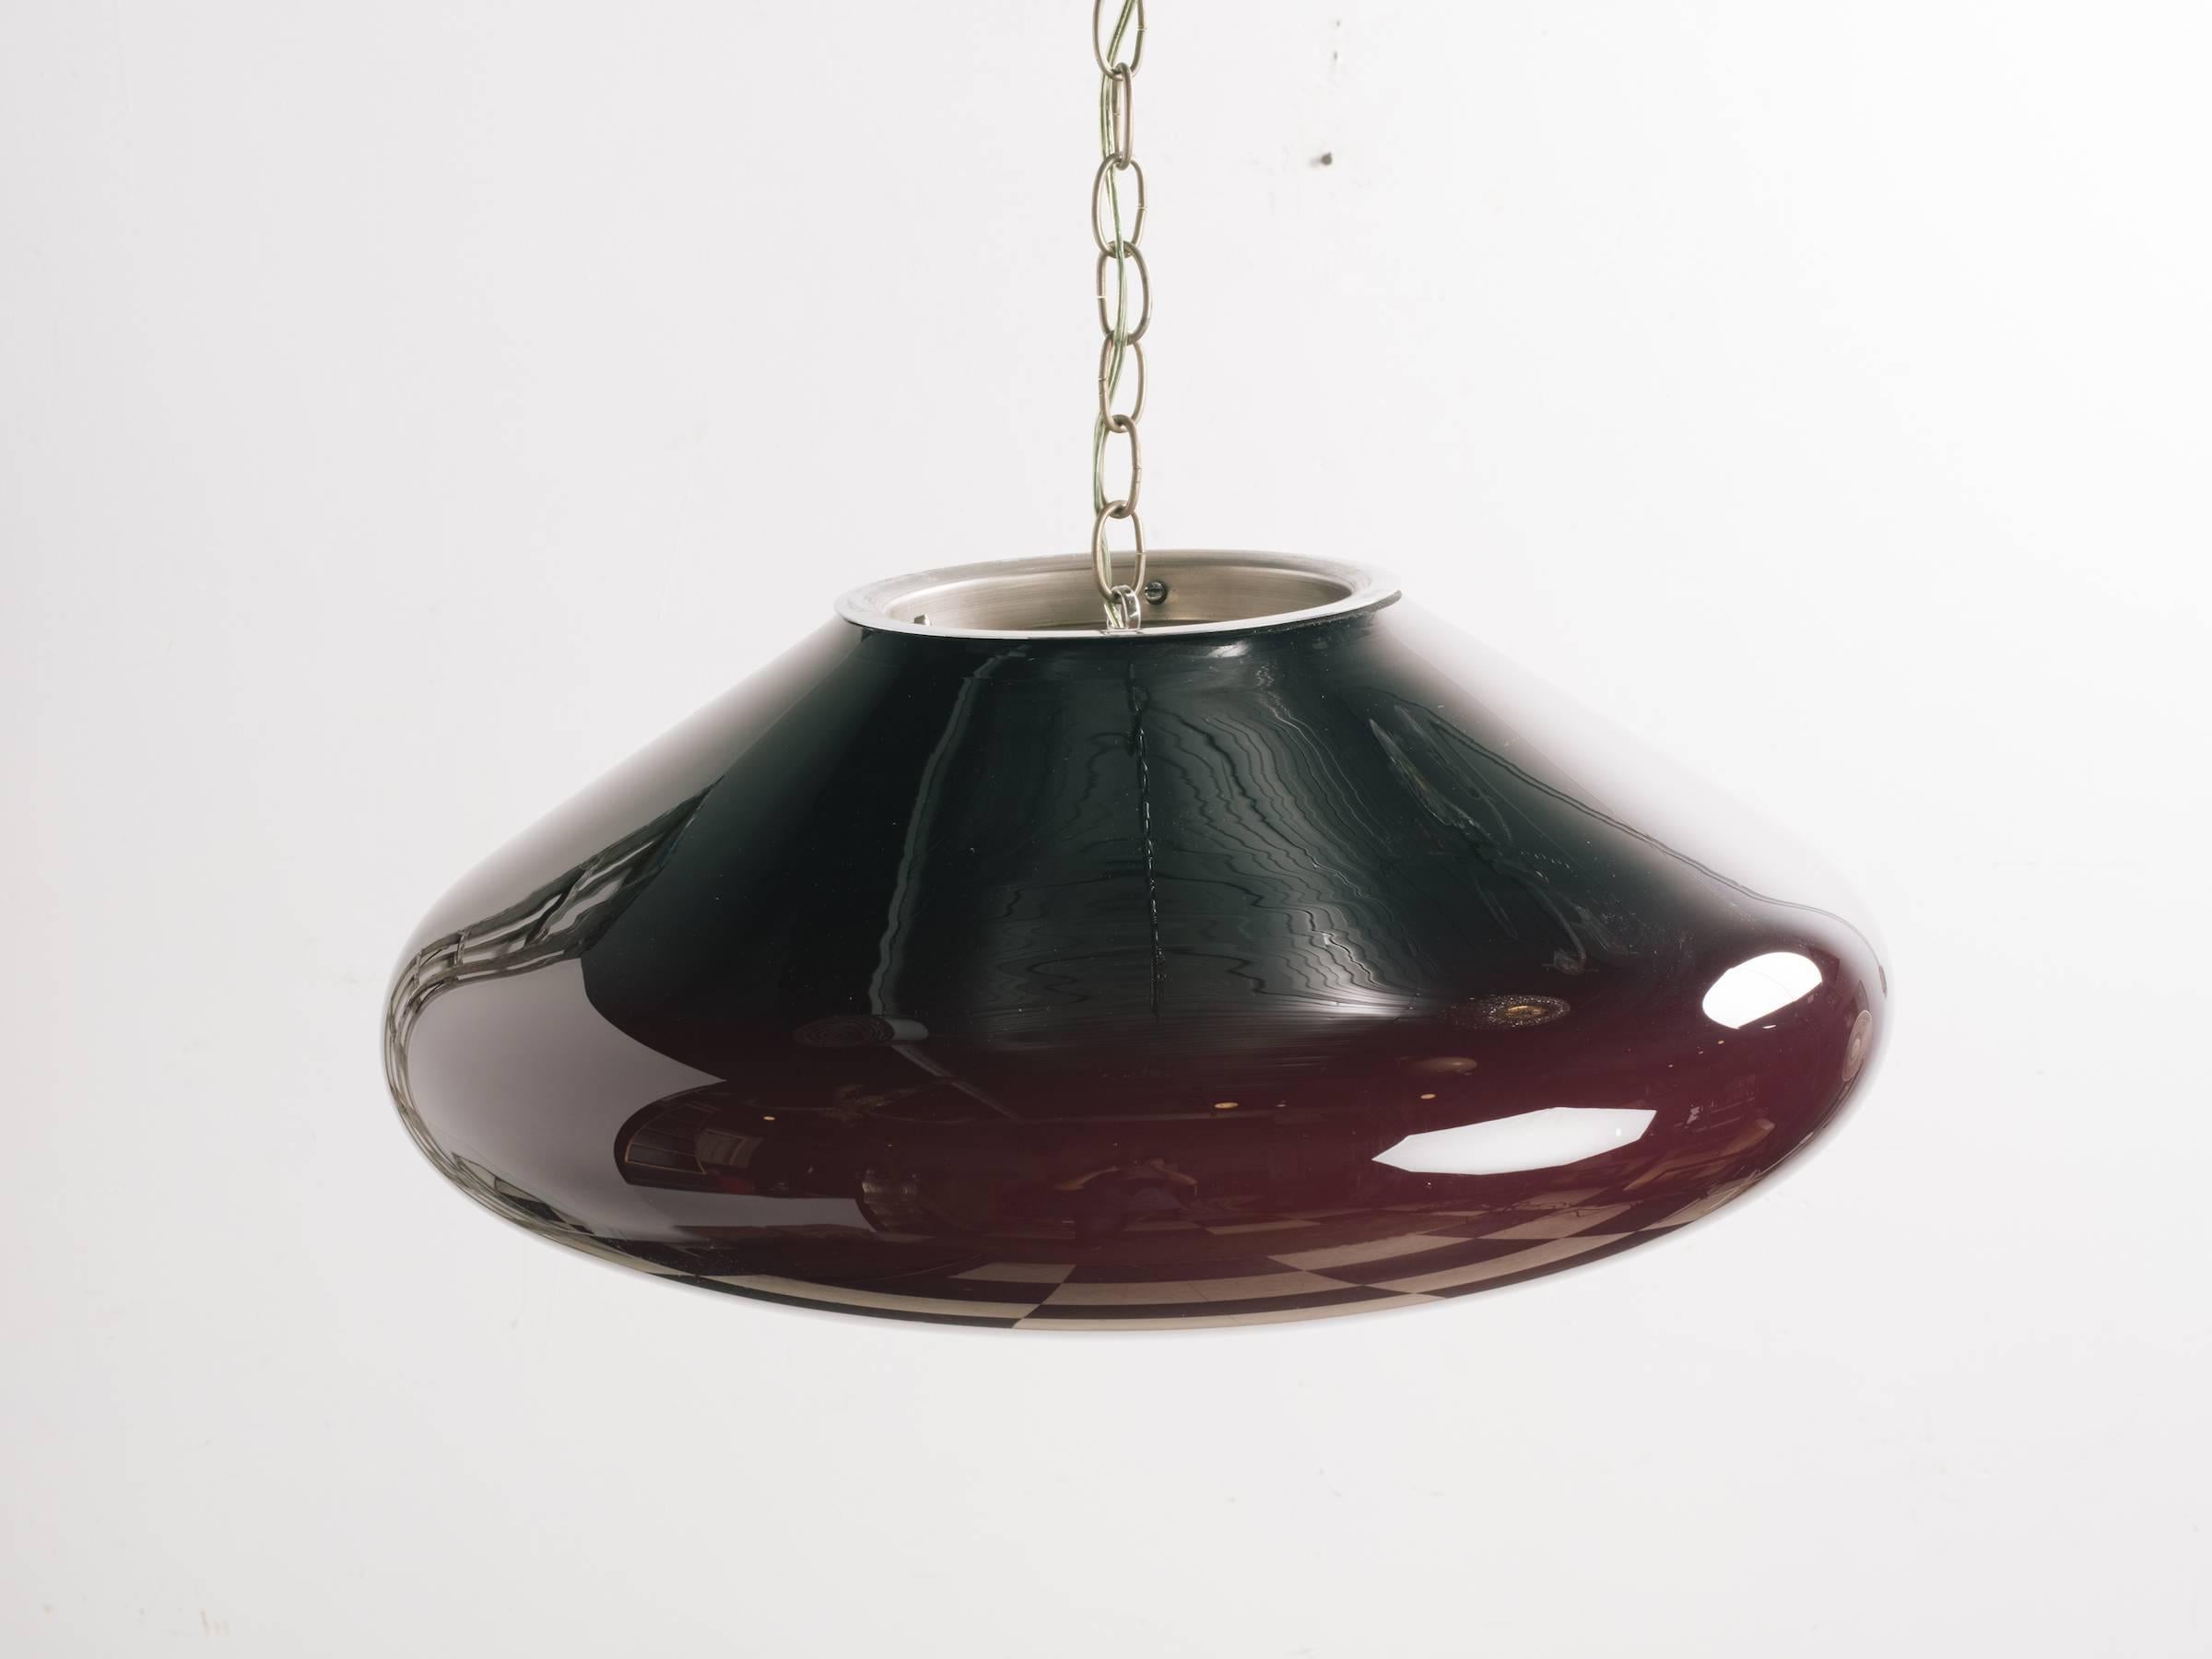 1980s Italian glass chandelier. Darkest at the top and the color gradually gets lighter towards the bottom.